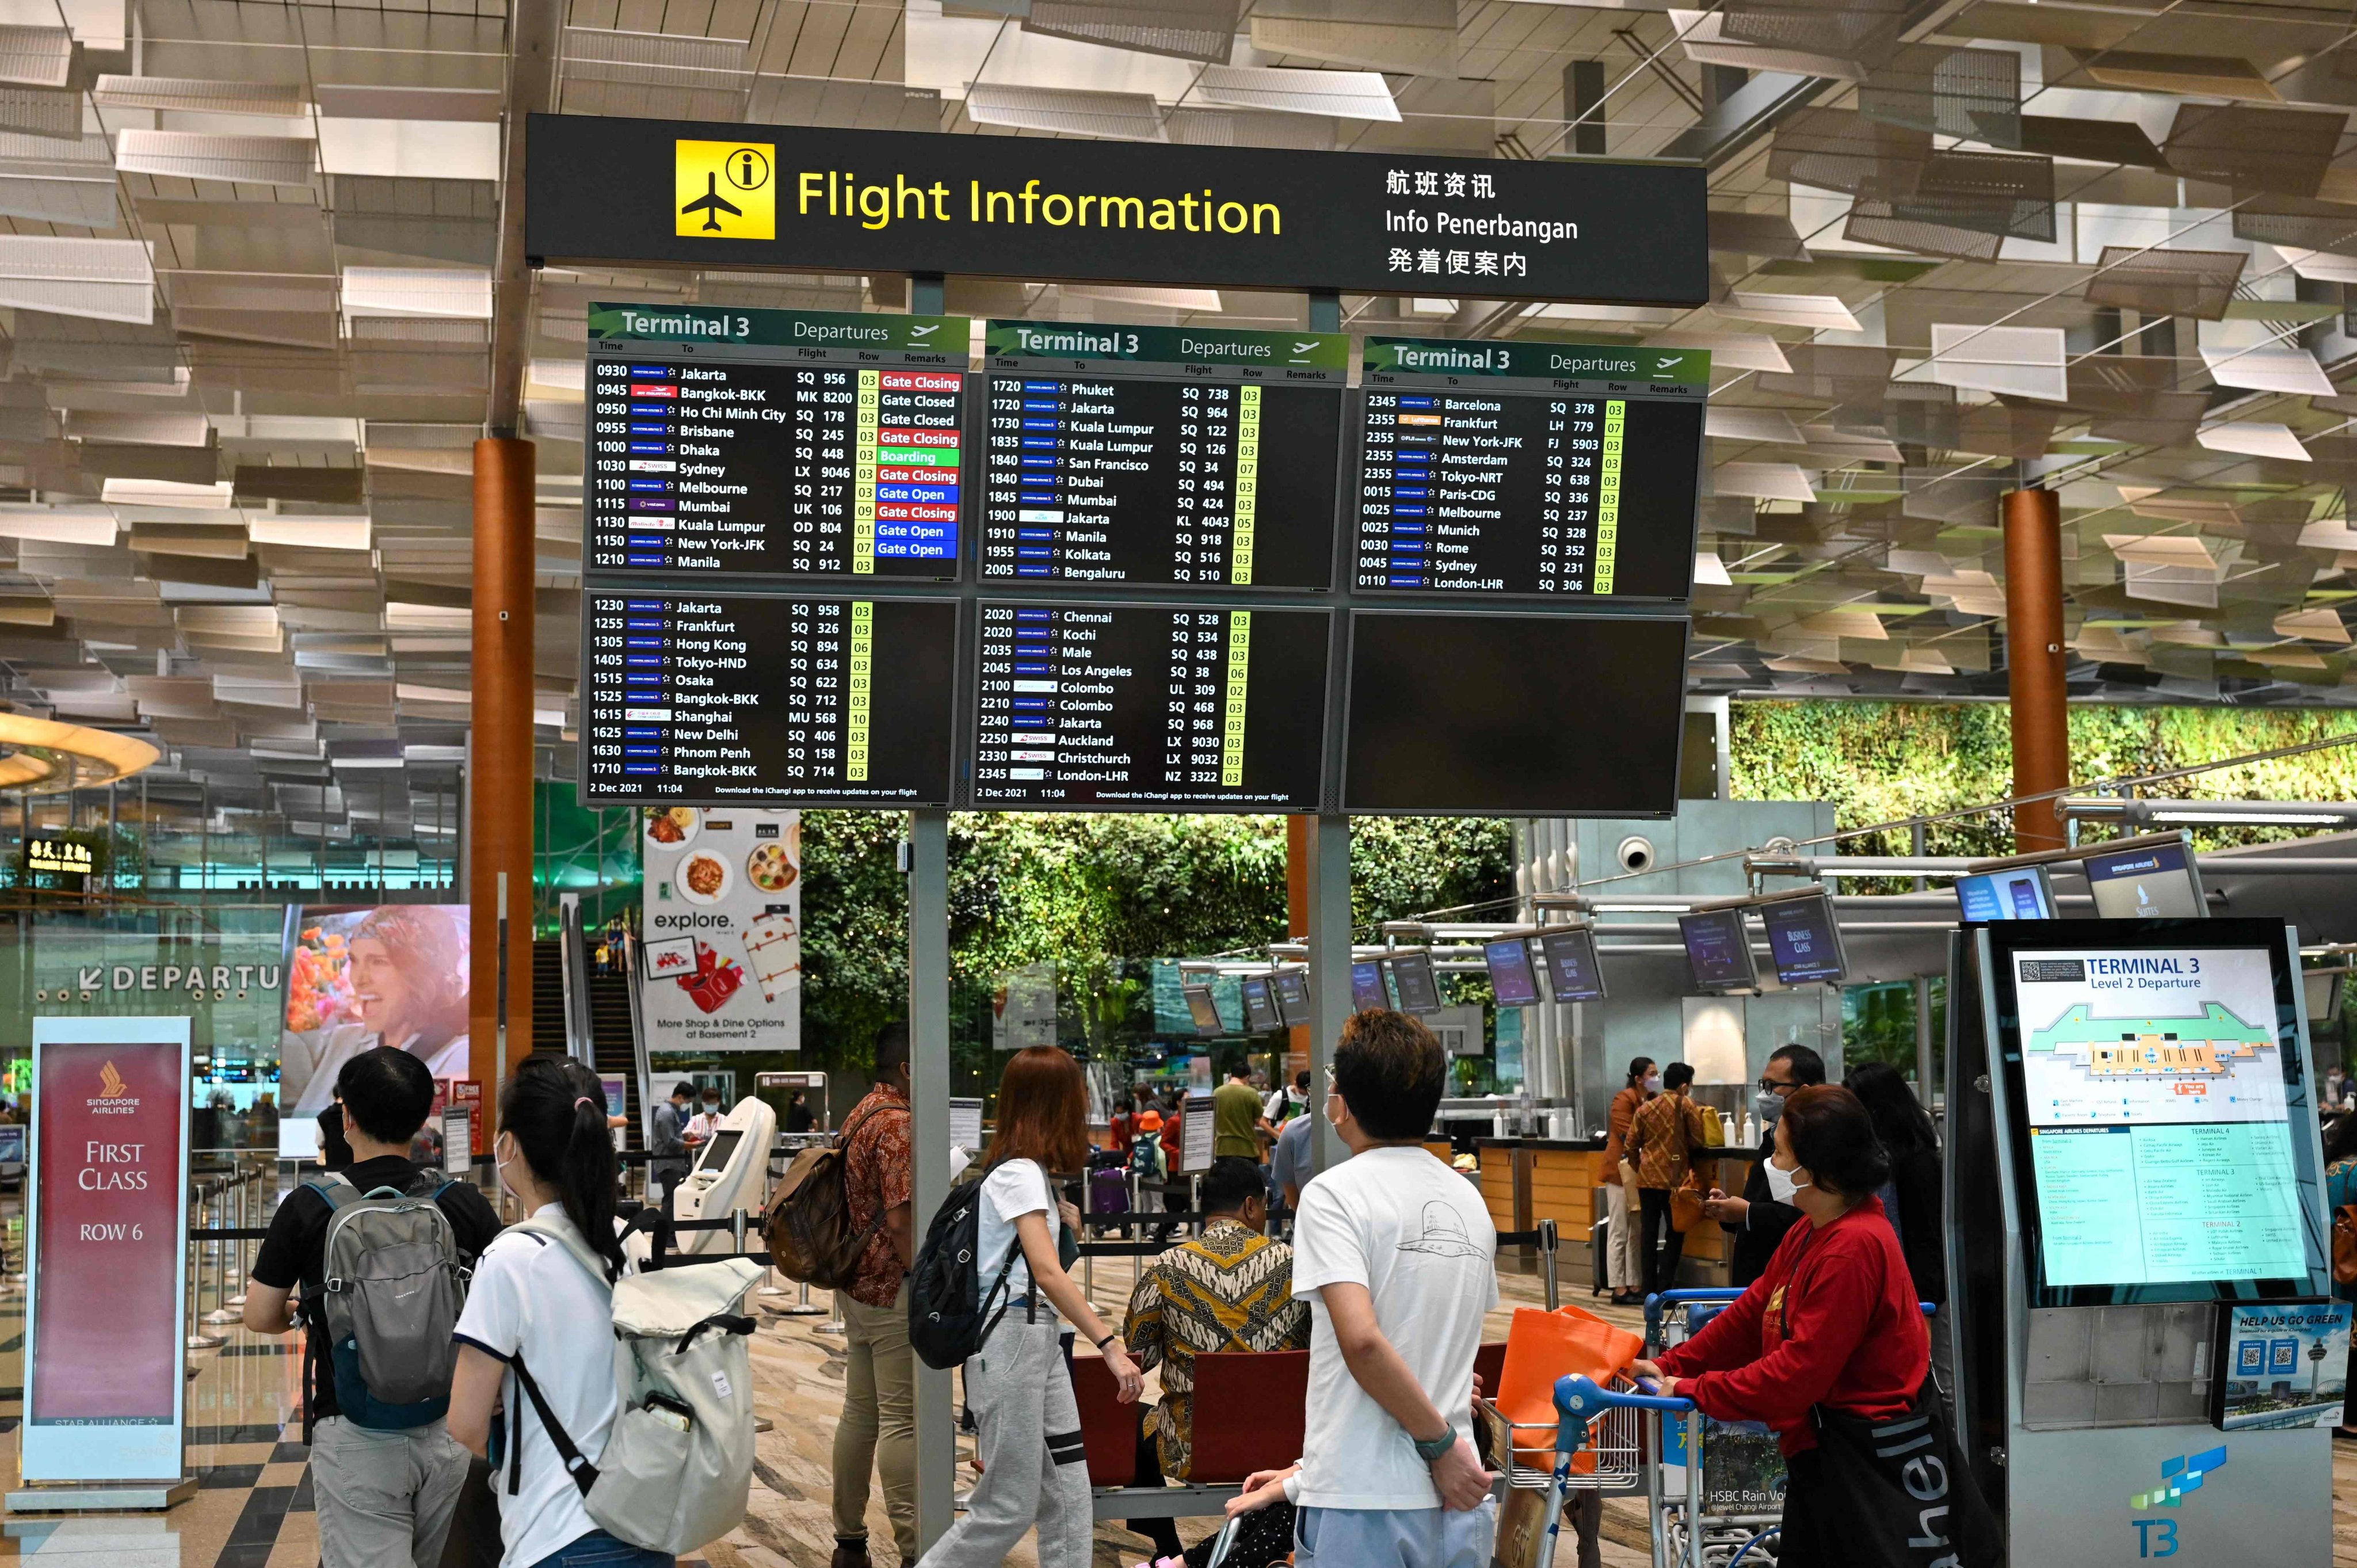 Terminal 5 project at Changi Airport to resume - Passenger Terminal Today